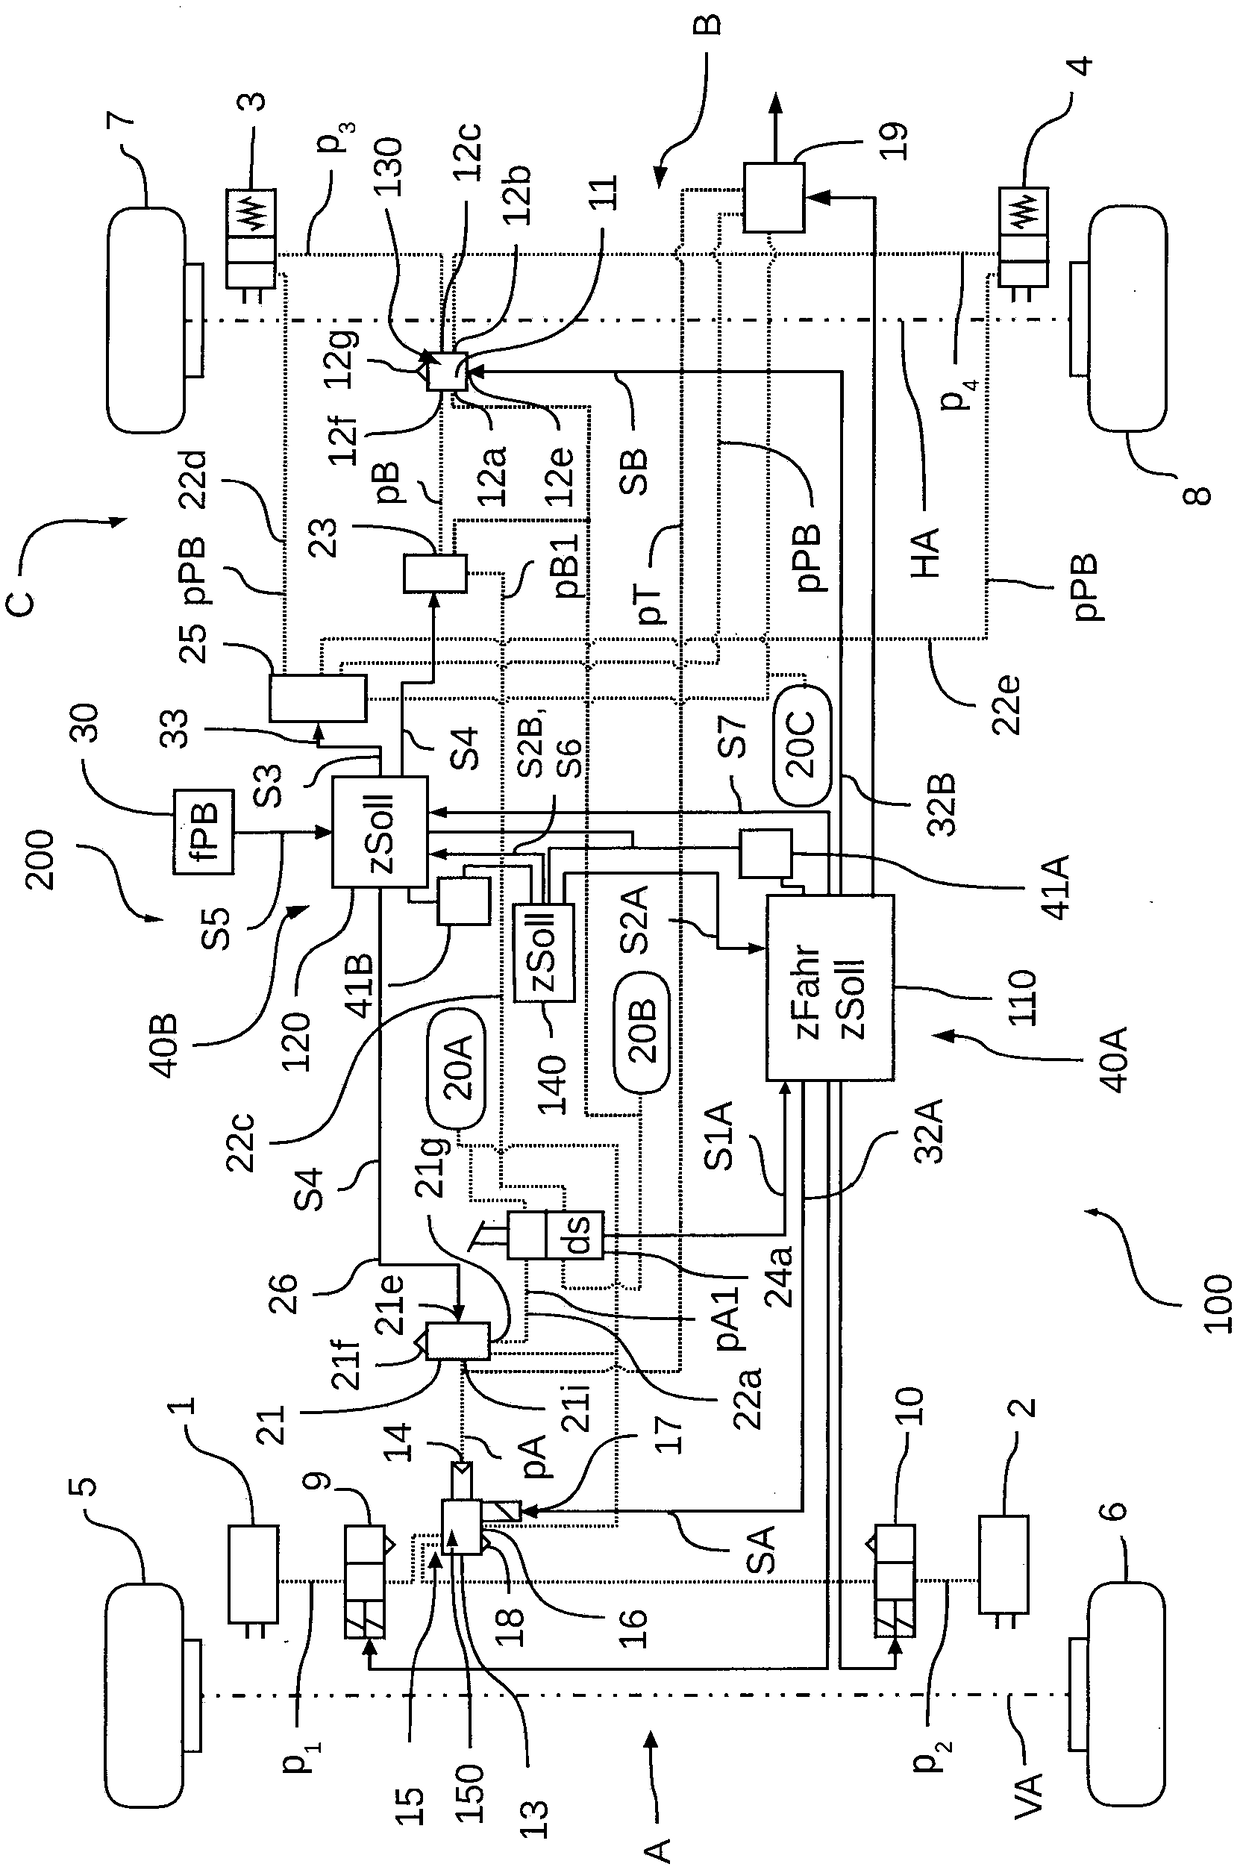 Electronically controllable pneumatic brake system in a utility vehicle and method for electronically controlling a pneumatic brake system